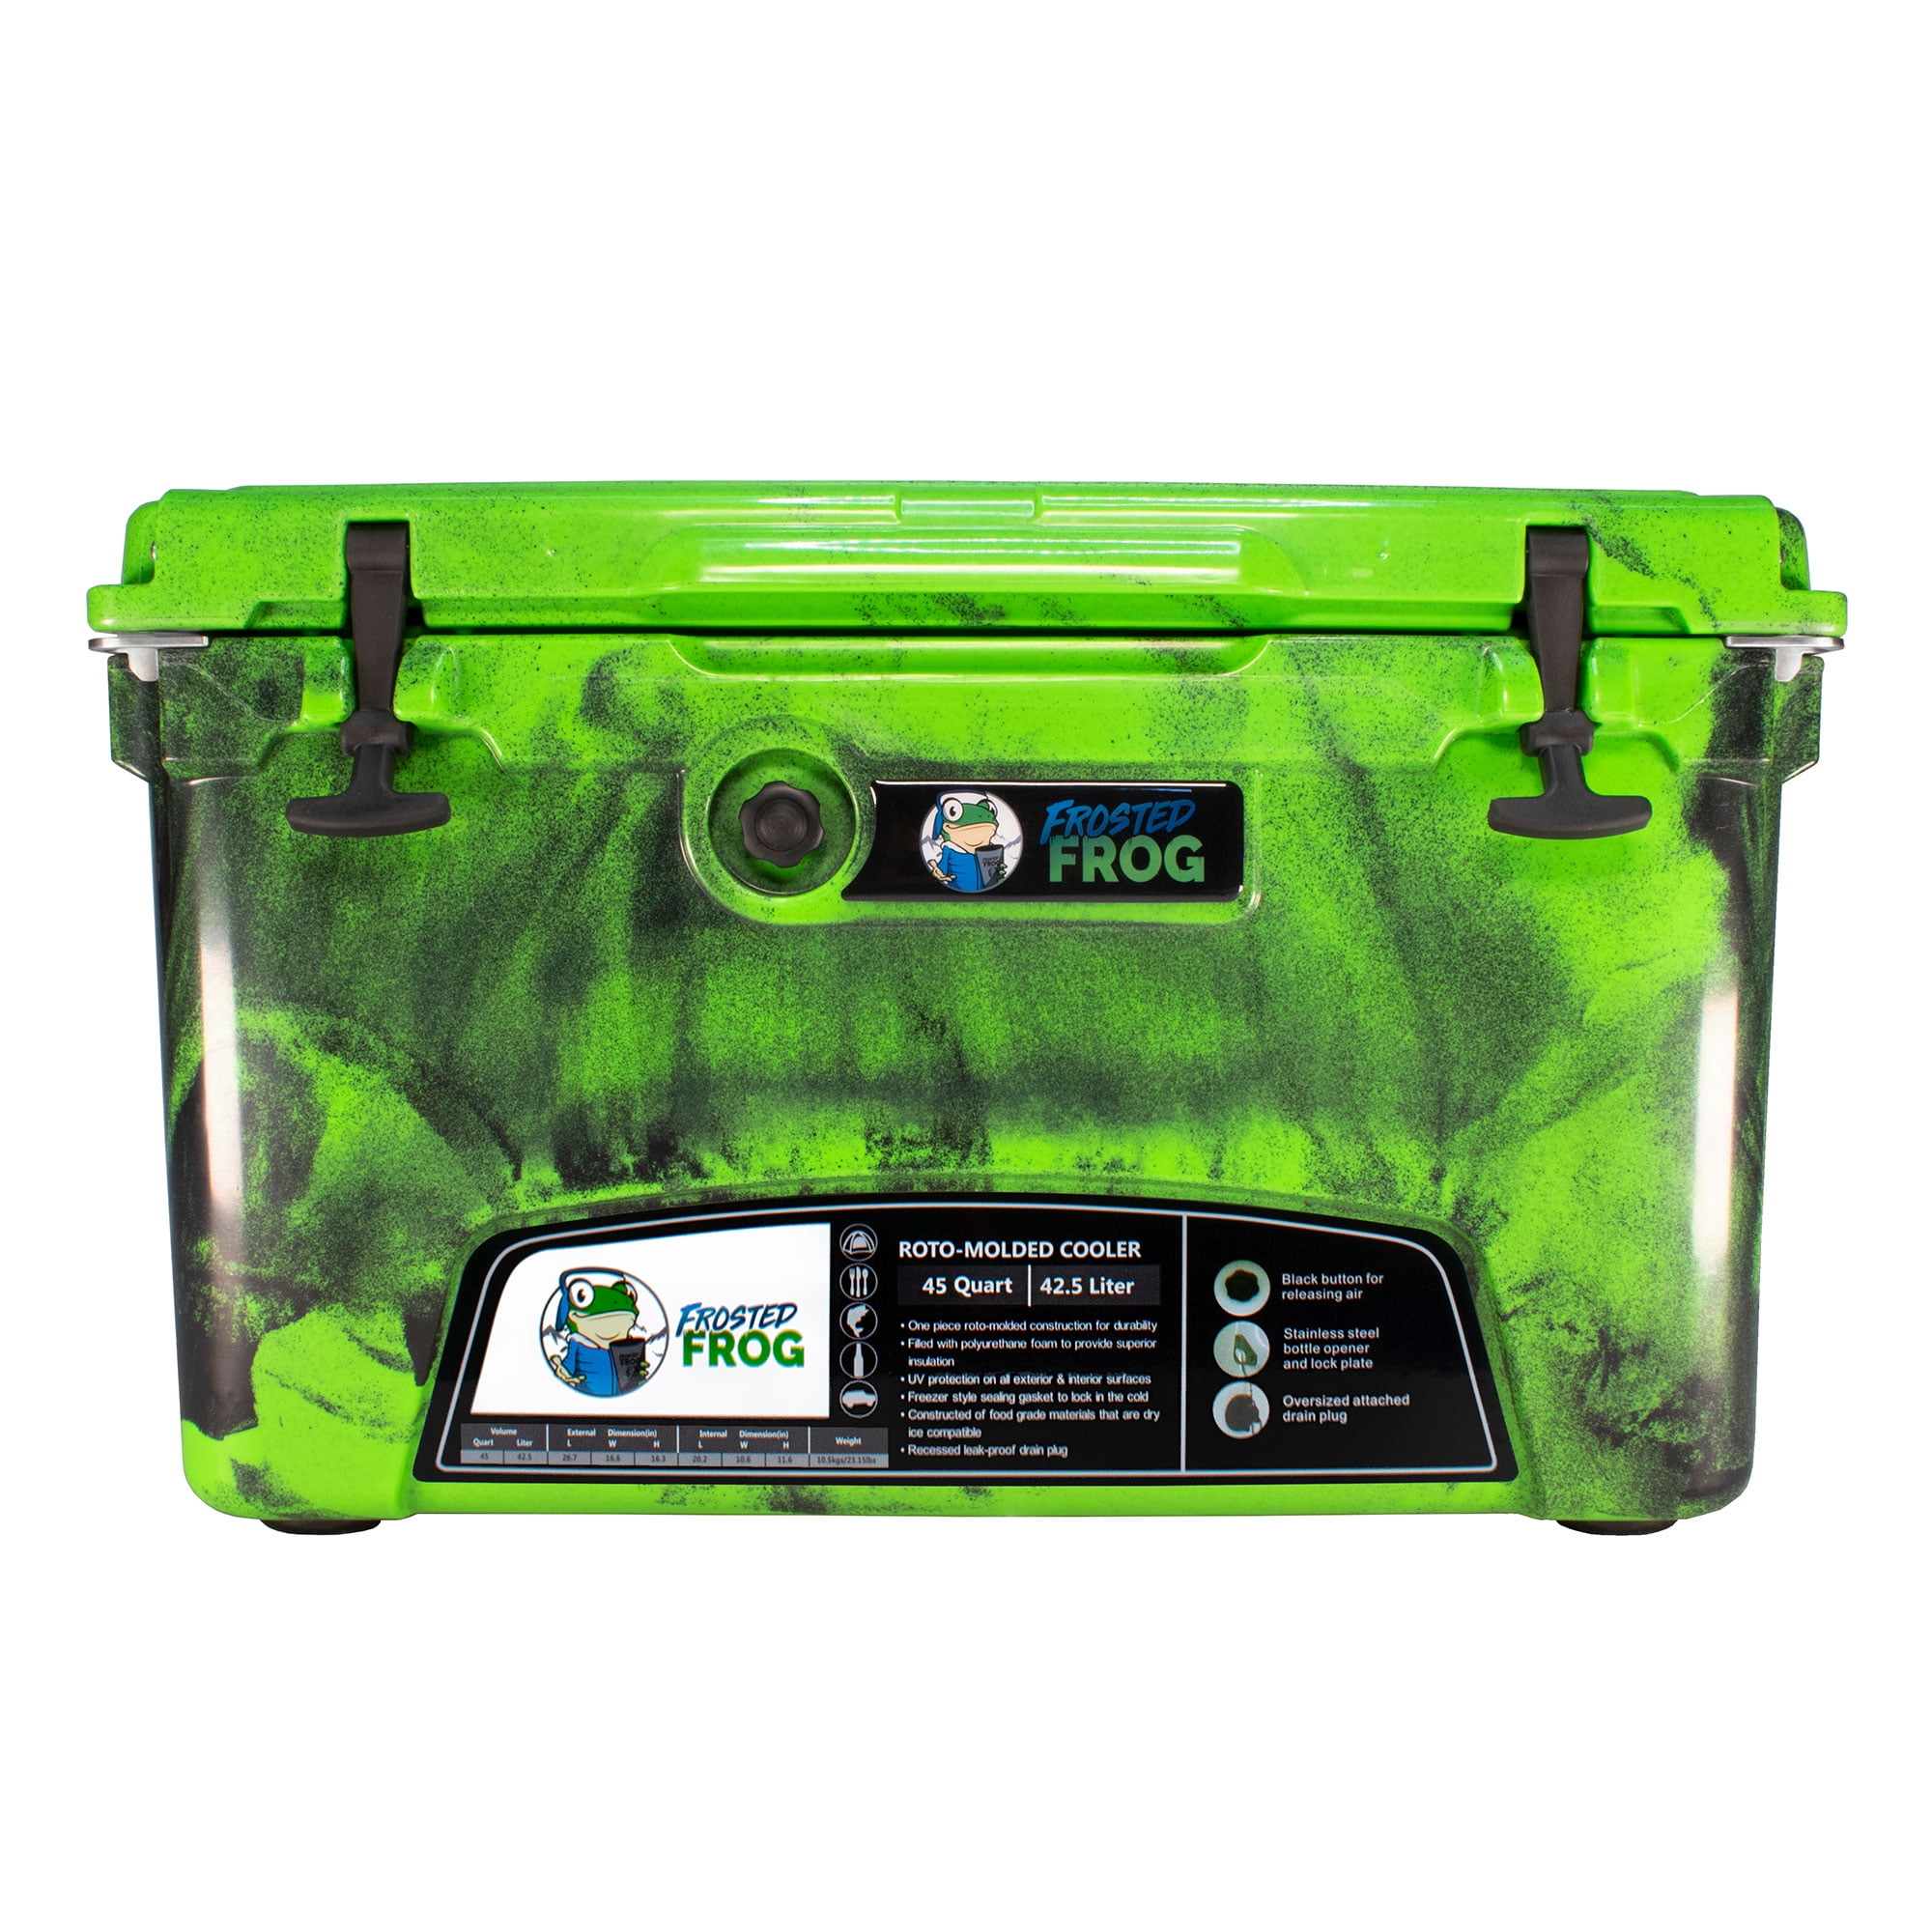 Frosted Frog 45 Qt Roto-Mold Commercial Grade Insulated Cooler, Green Camo  